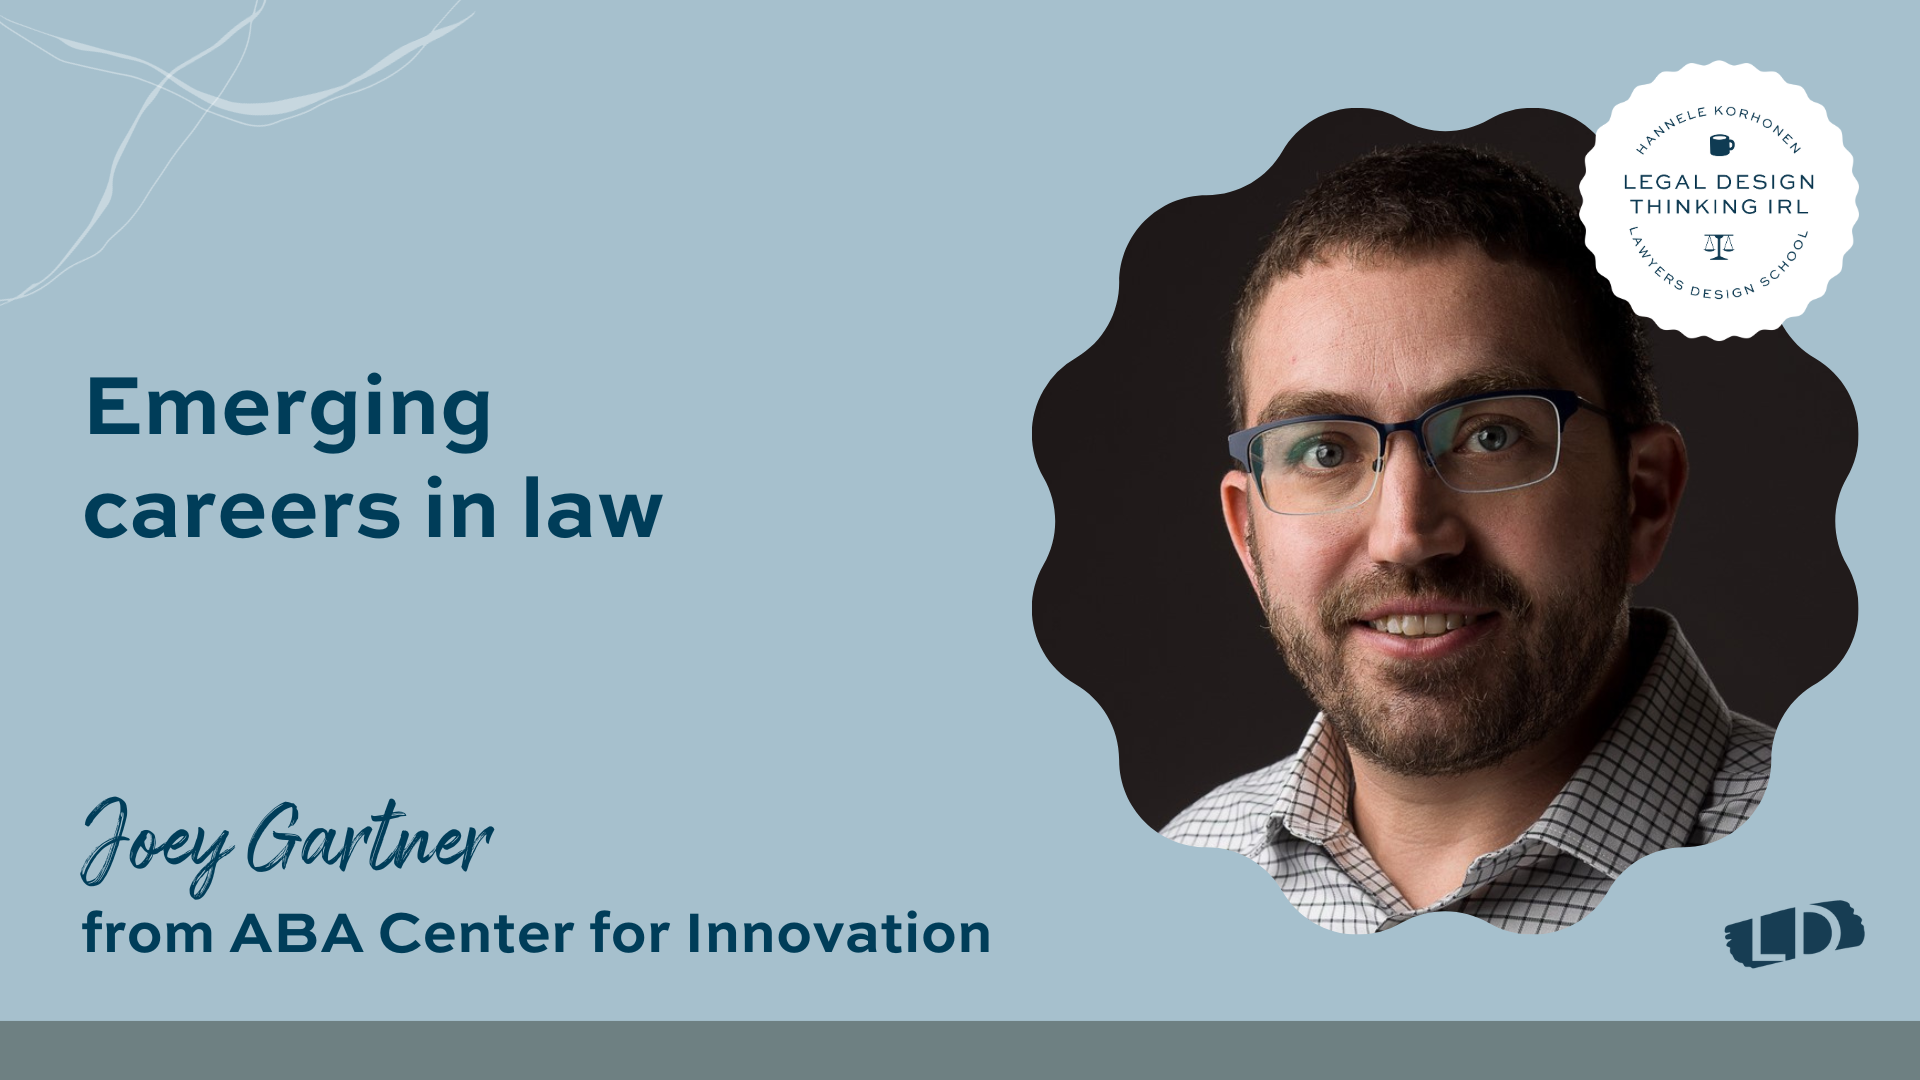 Emerging careers in law with Joey Gartner, ABA Center for Innovation